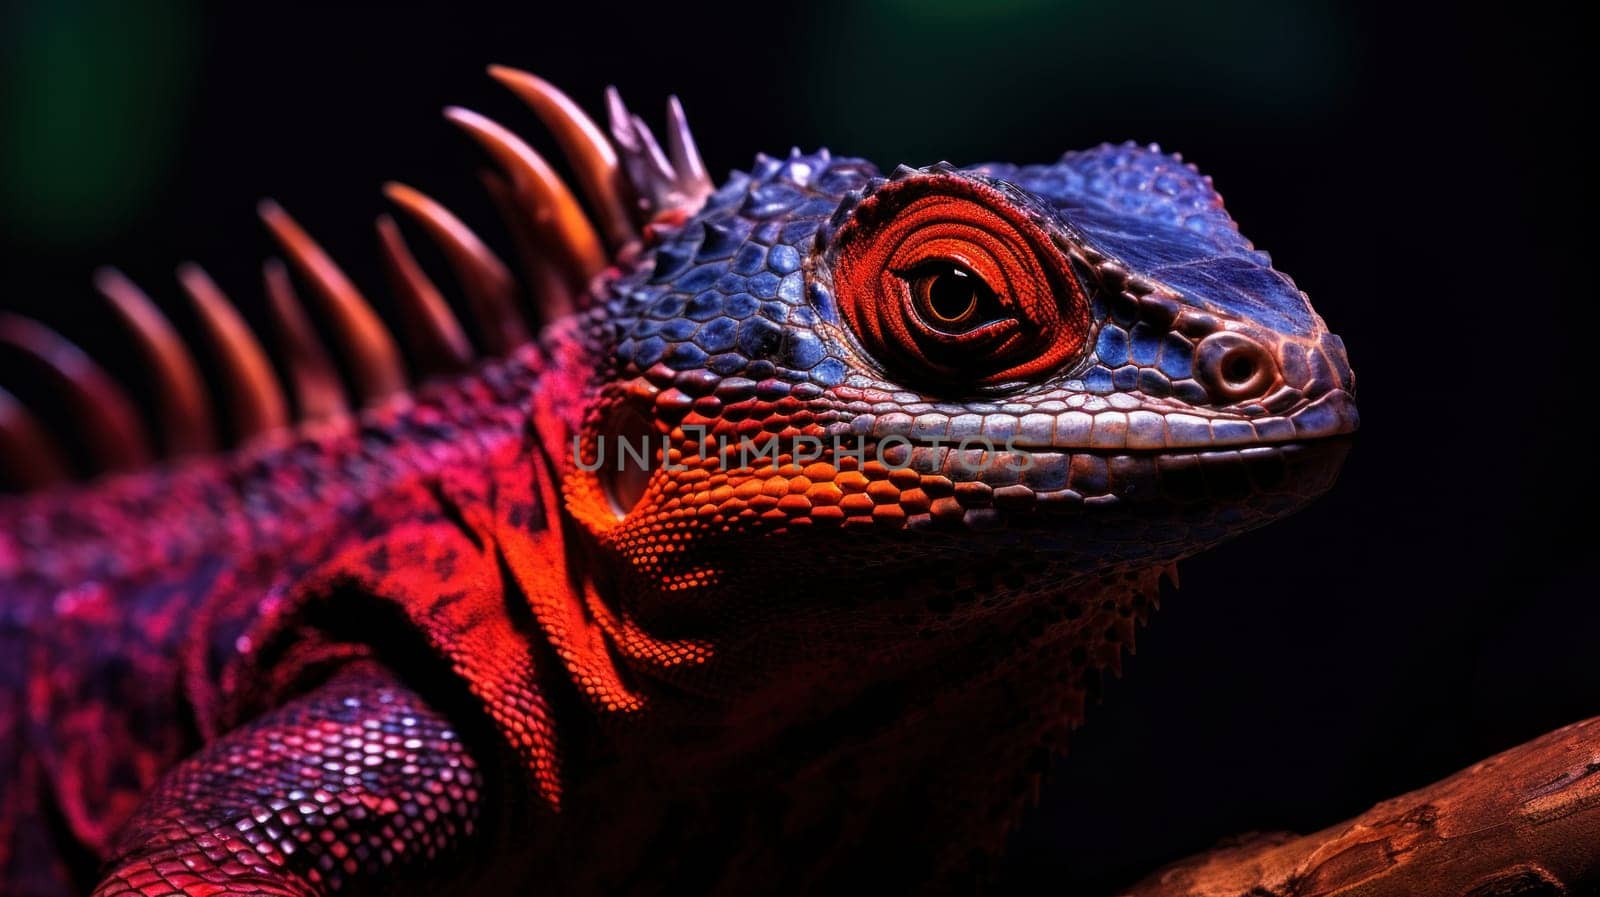 A close up of a colorful lizard with bright red eyes, AI by starush